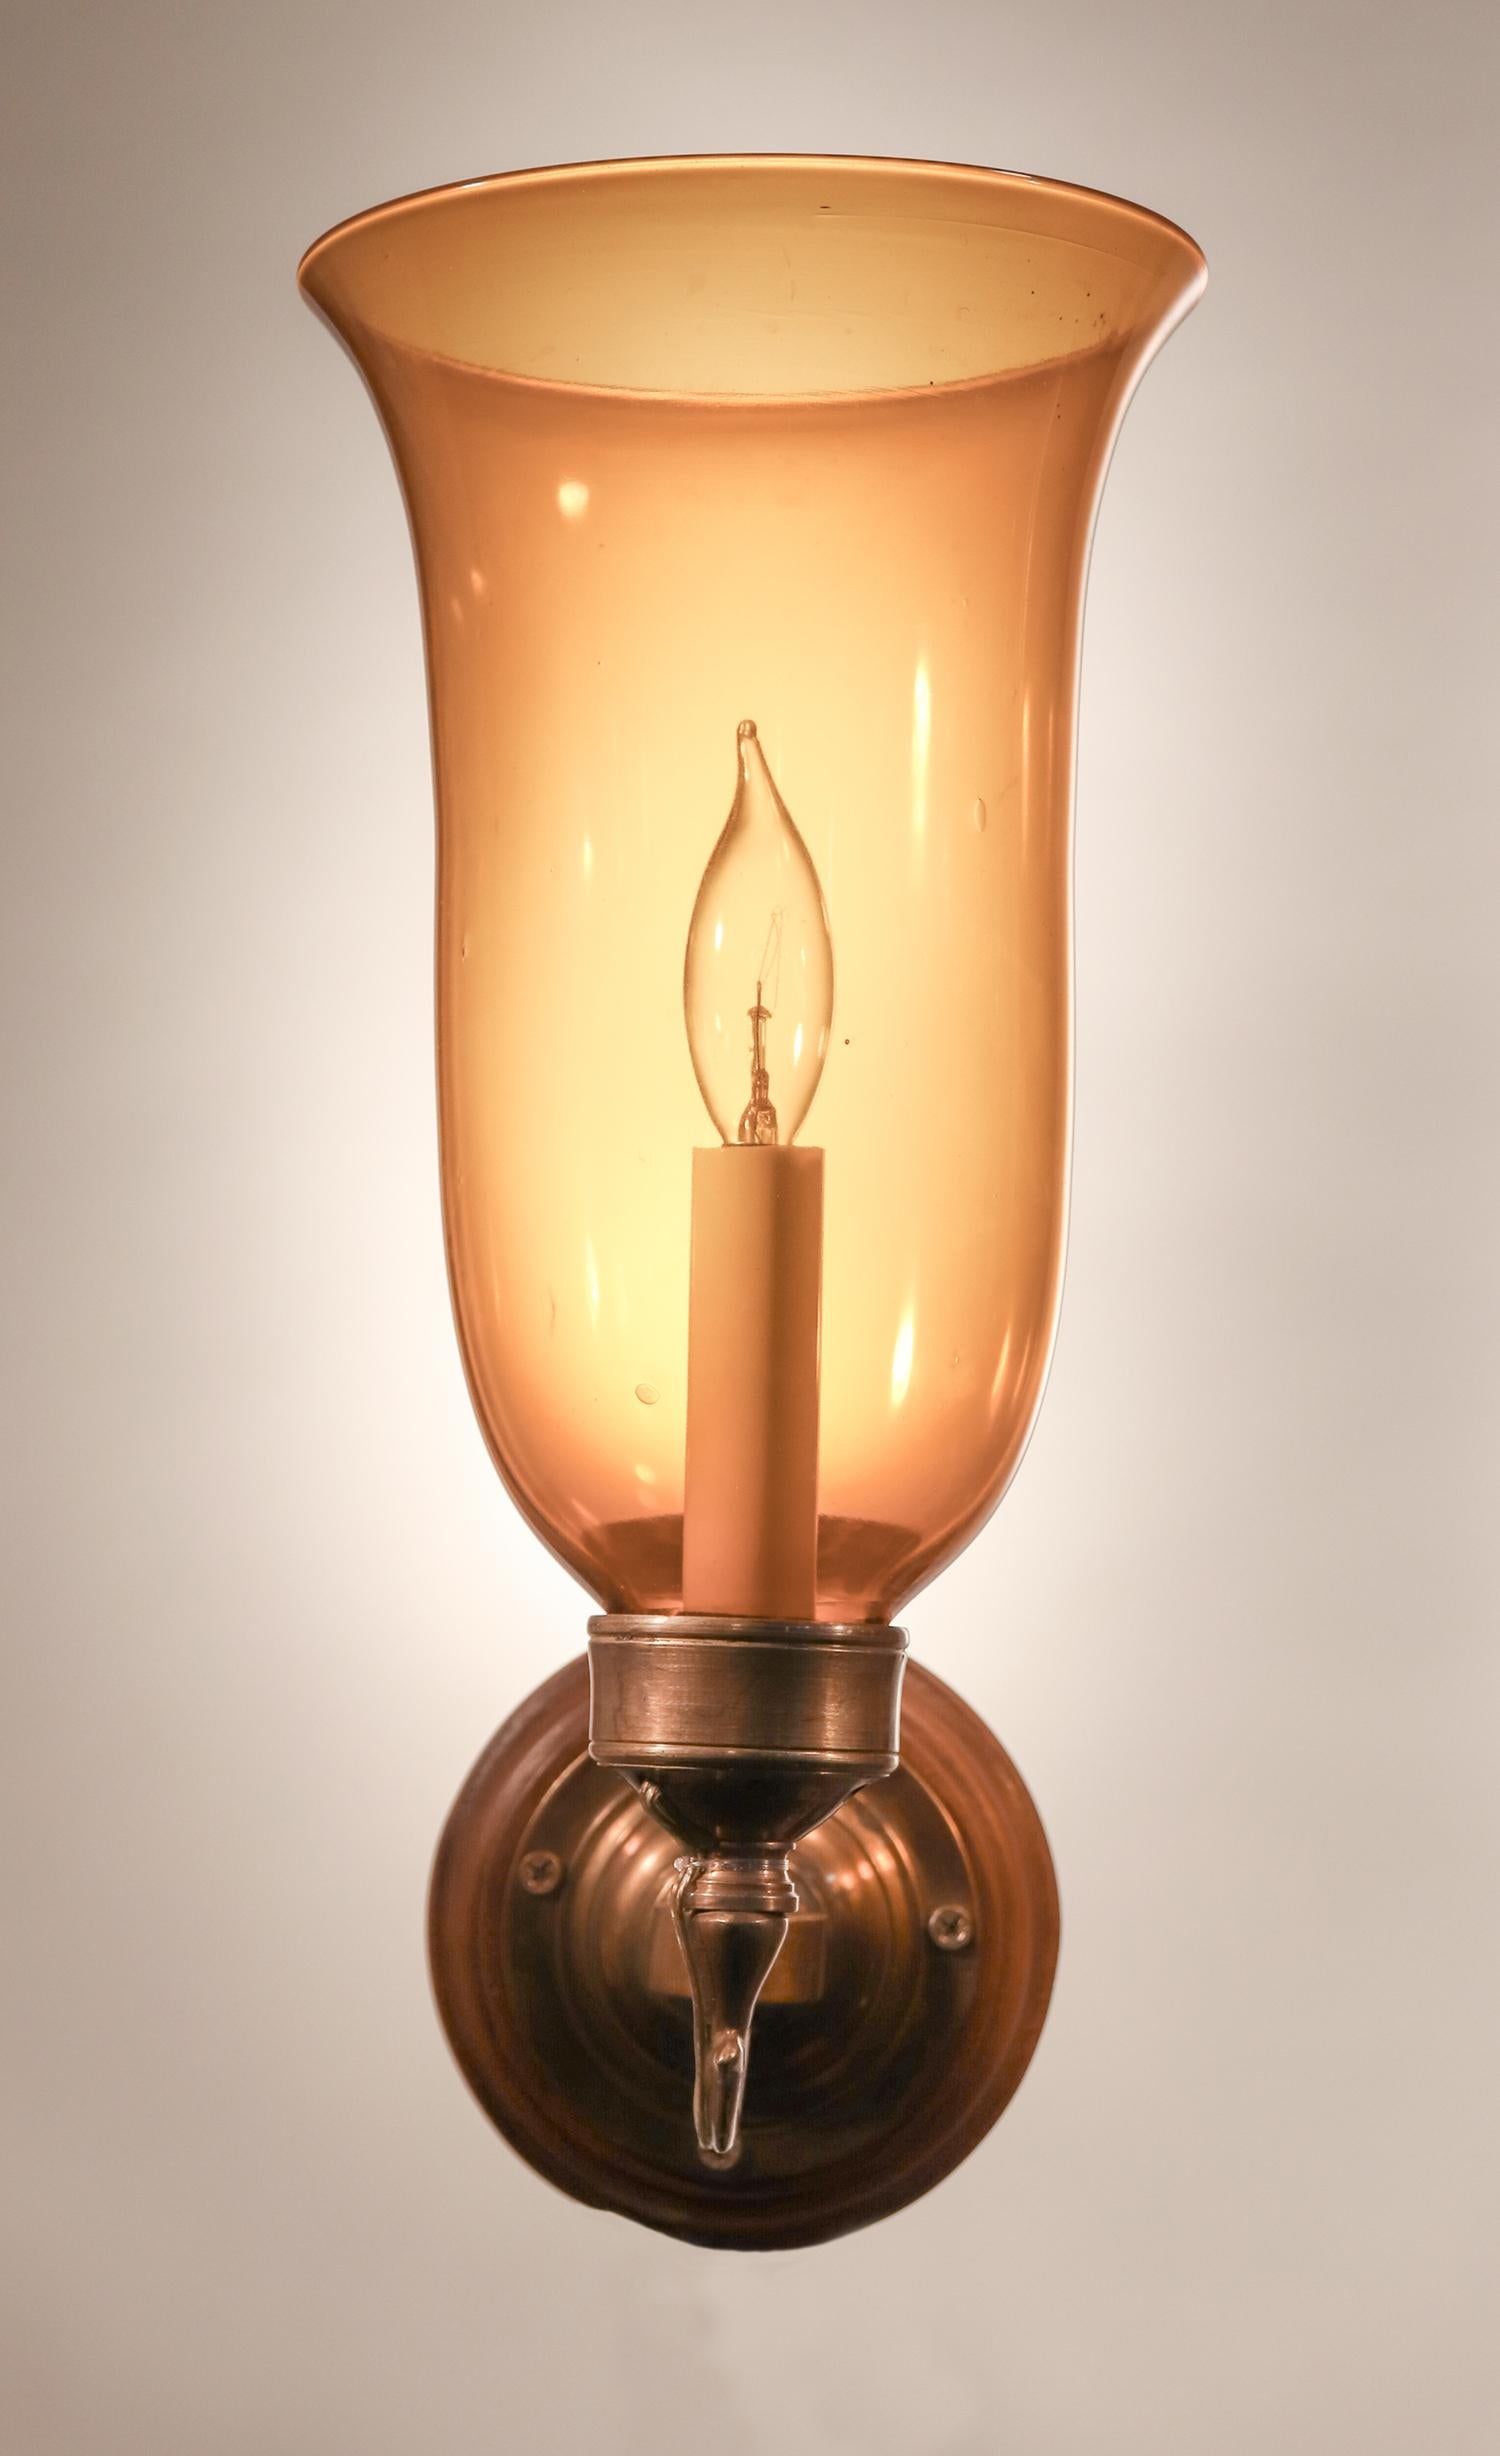 19th Century Antique Hurricane Shade Wall Sconces with Amber Colored Glass